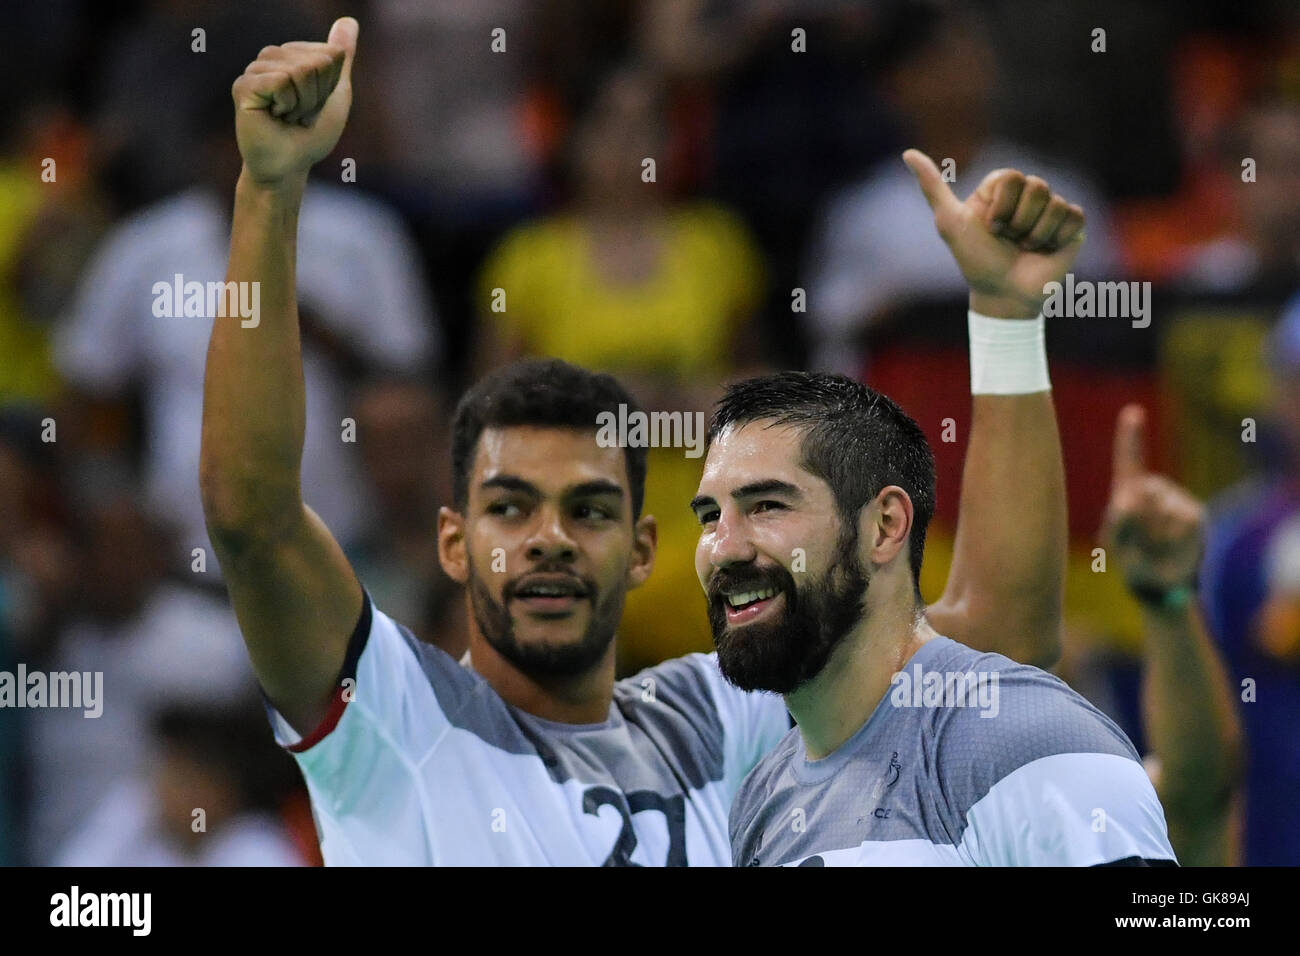 Rio de Janeiro, Brazil. 19th August, 2016. OLYMPICS 2016 HANDBALL - Nikola Karabatic (FRA) and Adrien Dipanda (FRA) in the match France vs Germany Handball during the Rio 2016 Olympics held in the arena of the future. NOT AVAILABLE FOR LICENSING IN CHINA (Photo: Celso Pupo/Fotoarena) Credit:  Foto Arena LTDA/Alamy Live News Stock Photo